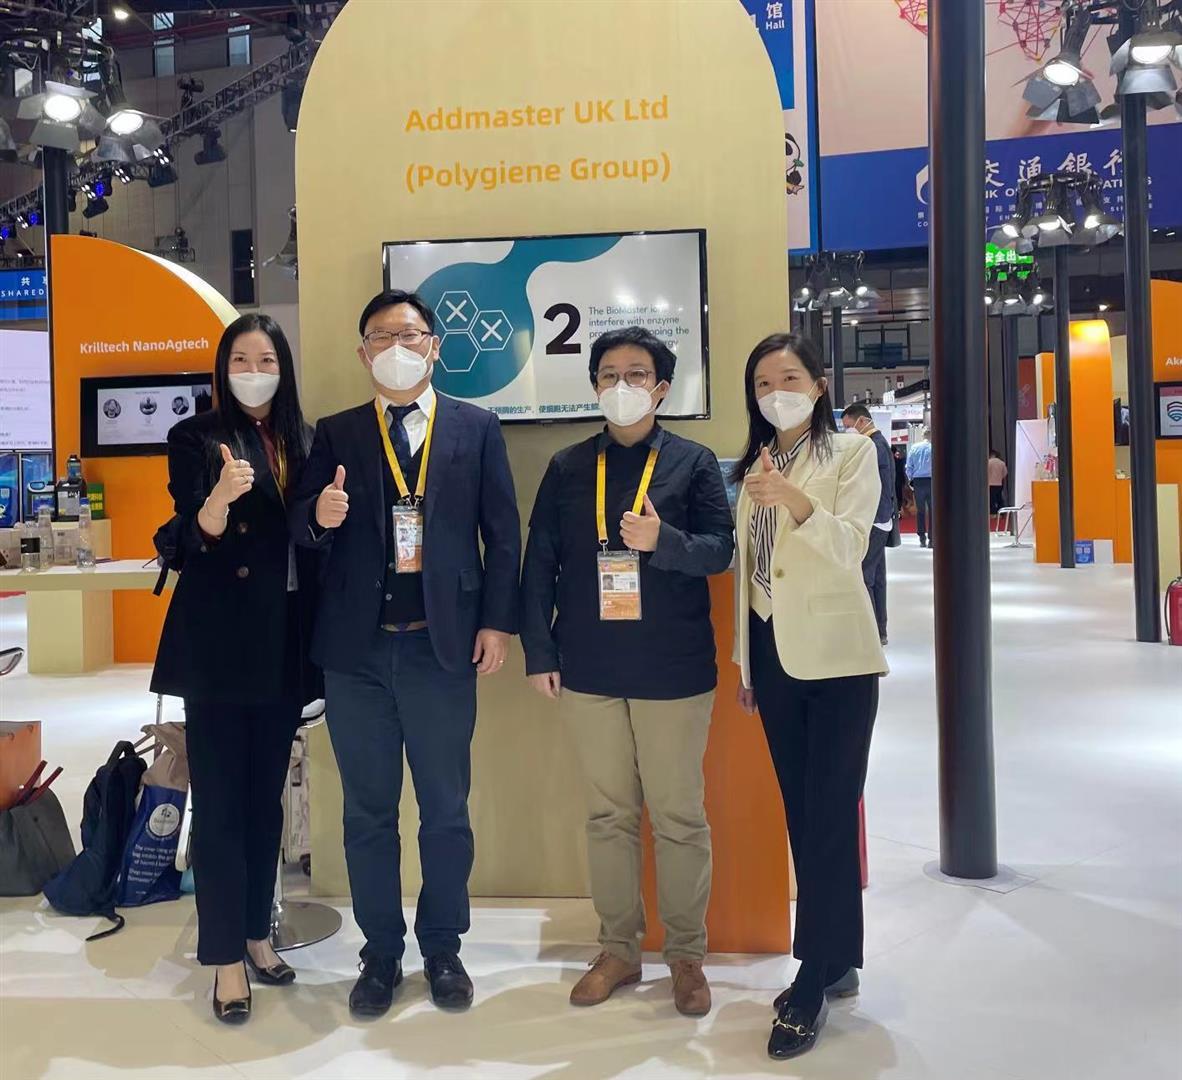 Jenny Zhu (first from left), Commercial Director of Polygiene China, and Lawrence Li (second from left), General Manager of Jebsen & Jessen Ingredients China